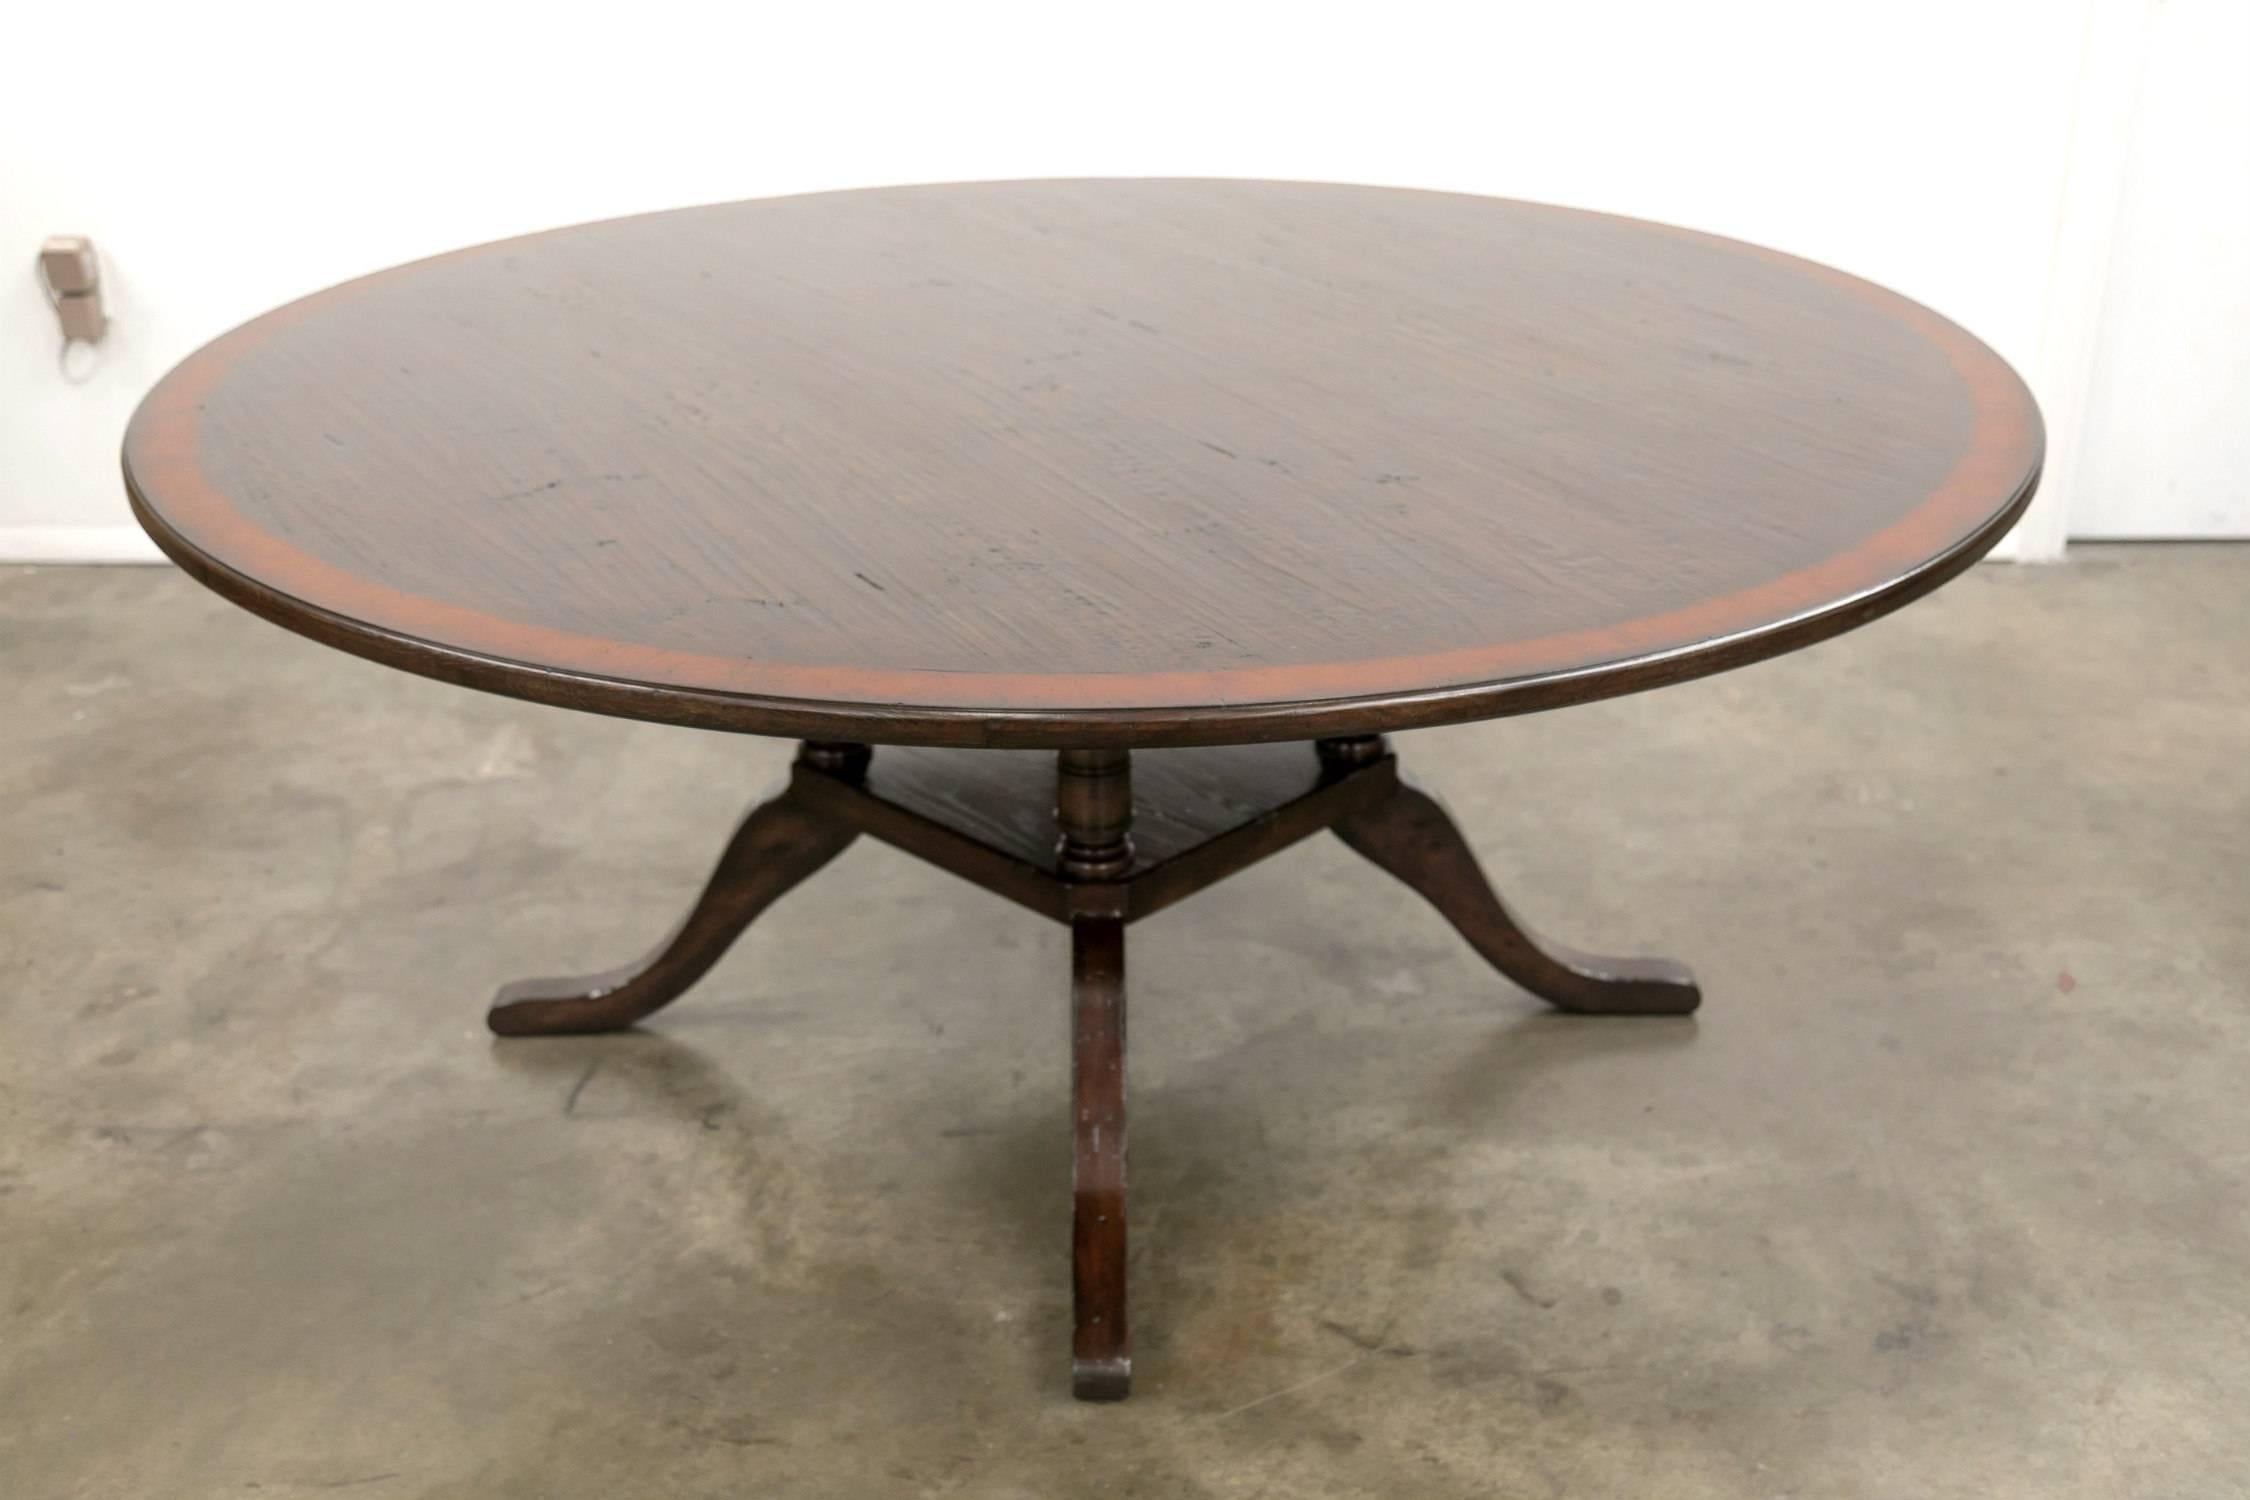 A Classic Georgian style pedestal dining table, handcrafted in England, having a 72-inch diameter, oak top bordered by a rich burled walnut band. Supported by a birdcage pedestal base made of four turned and carved rustic oak columns over a square